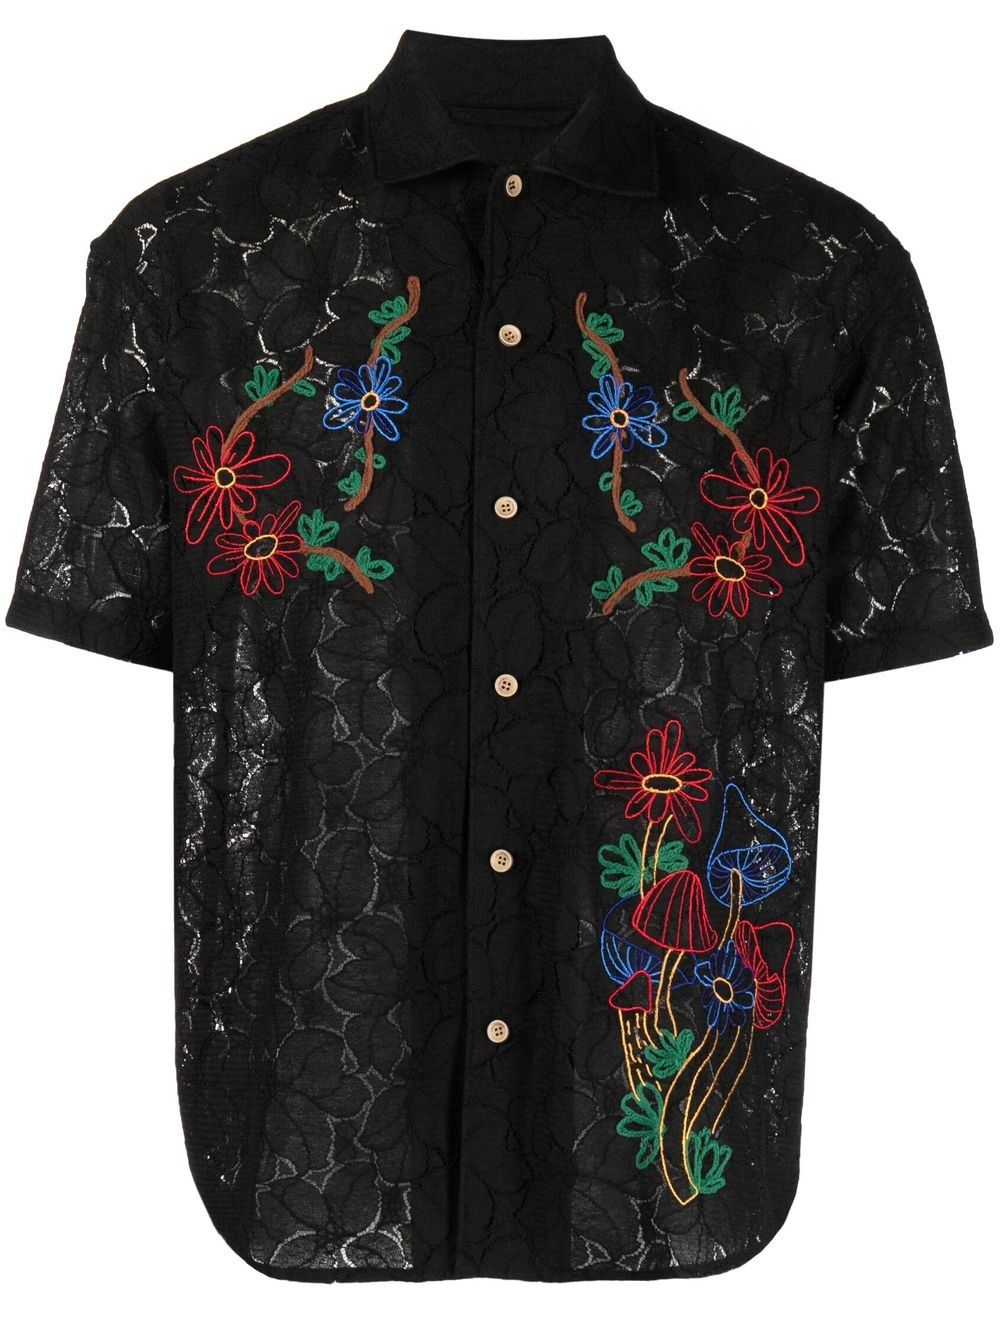 ANDERSSON BELL FLORAL-EMBROIDERED PATTERNED-JACQUARD SHIRT